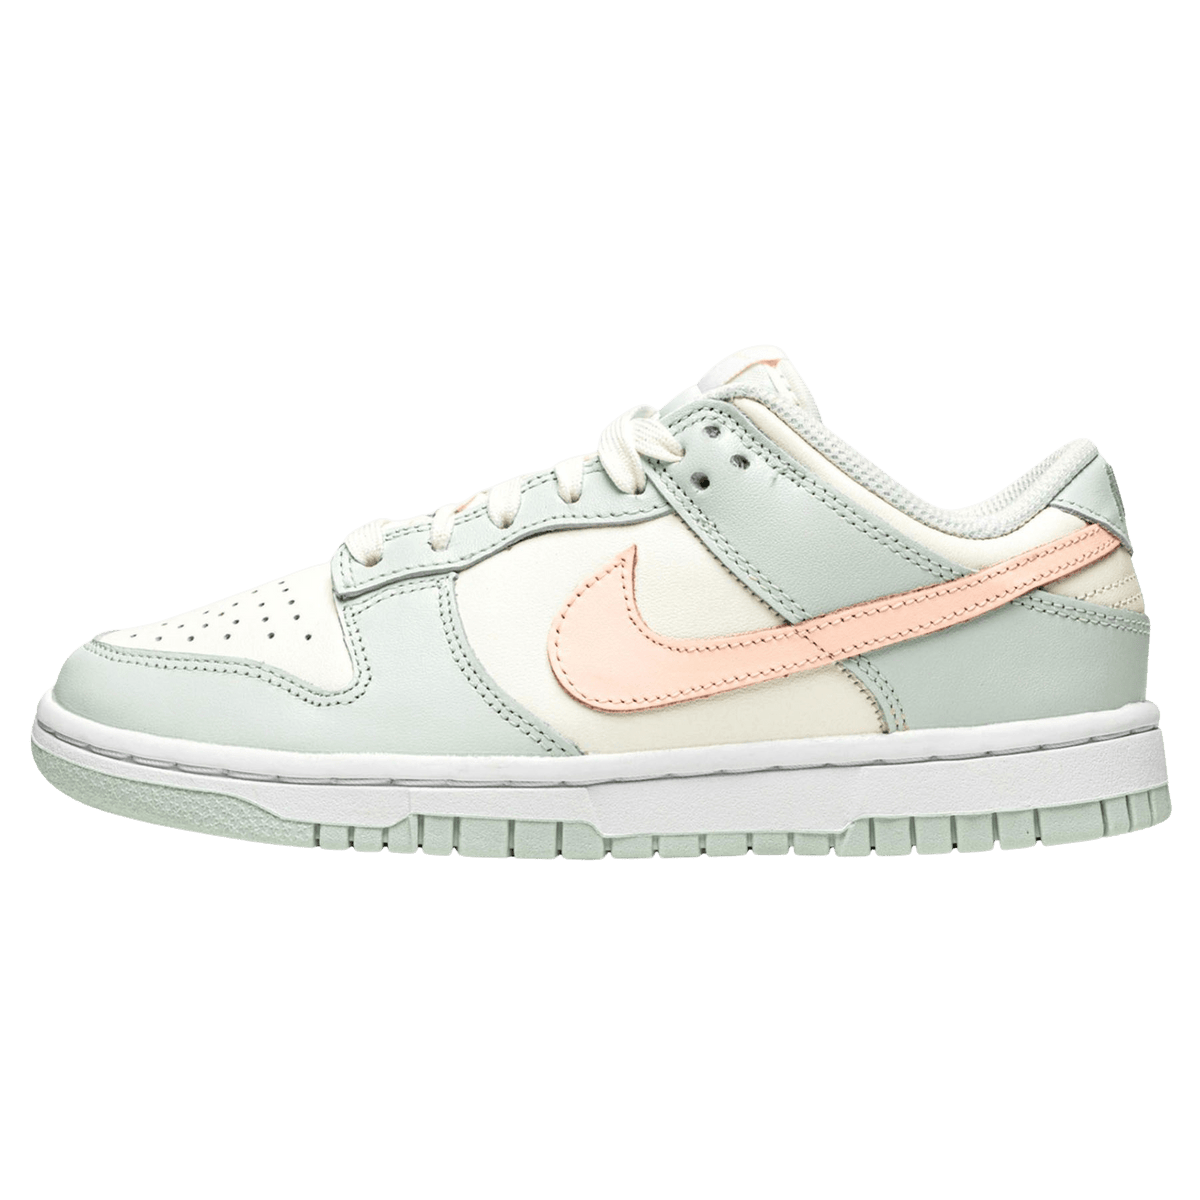 nike Rise dunk low wmns barely green DD1503 104 1